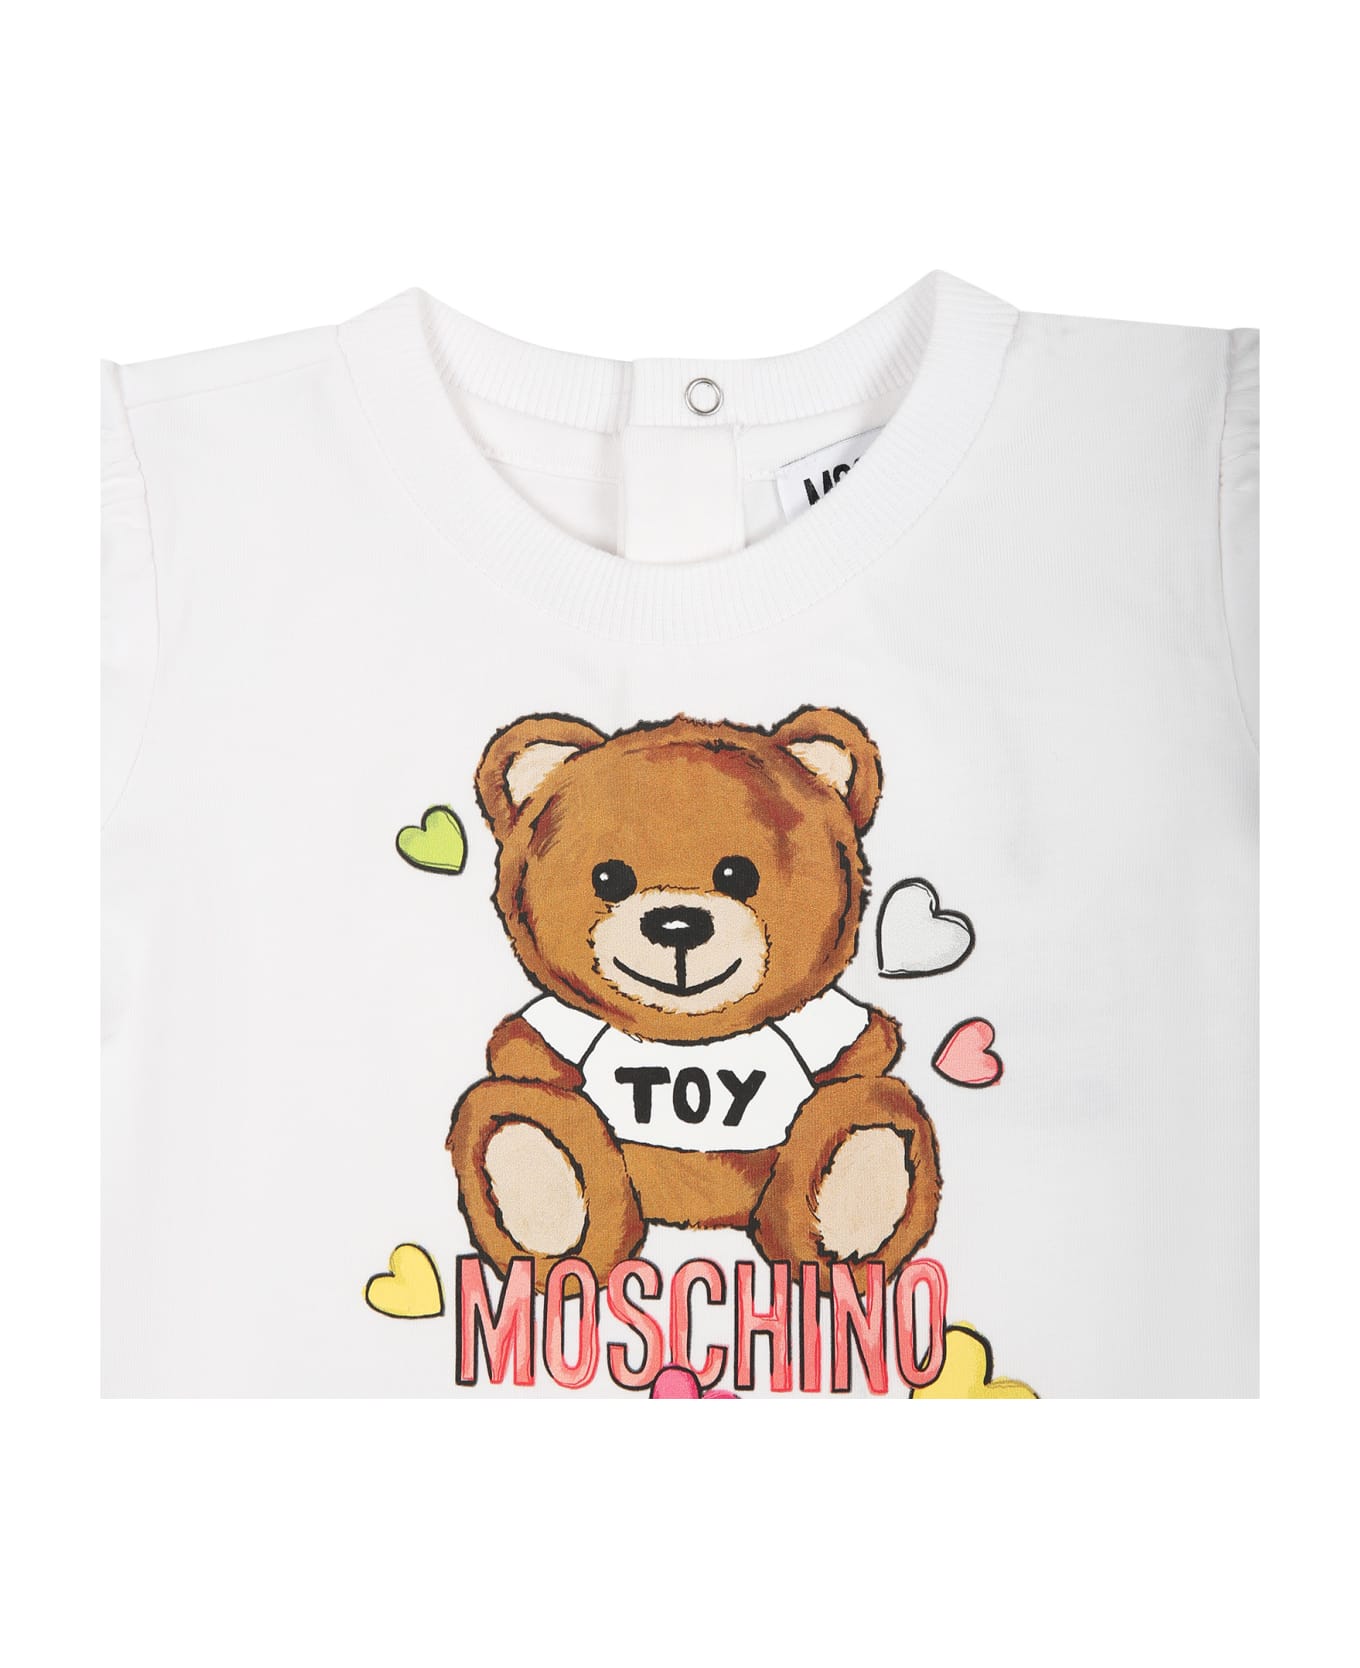 Moschino White Dress For Baby Girl With Teddy Bear Print - White